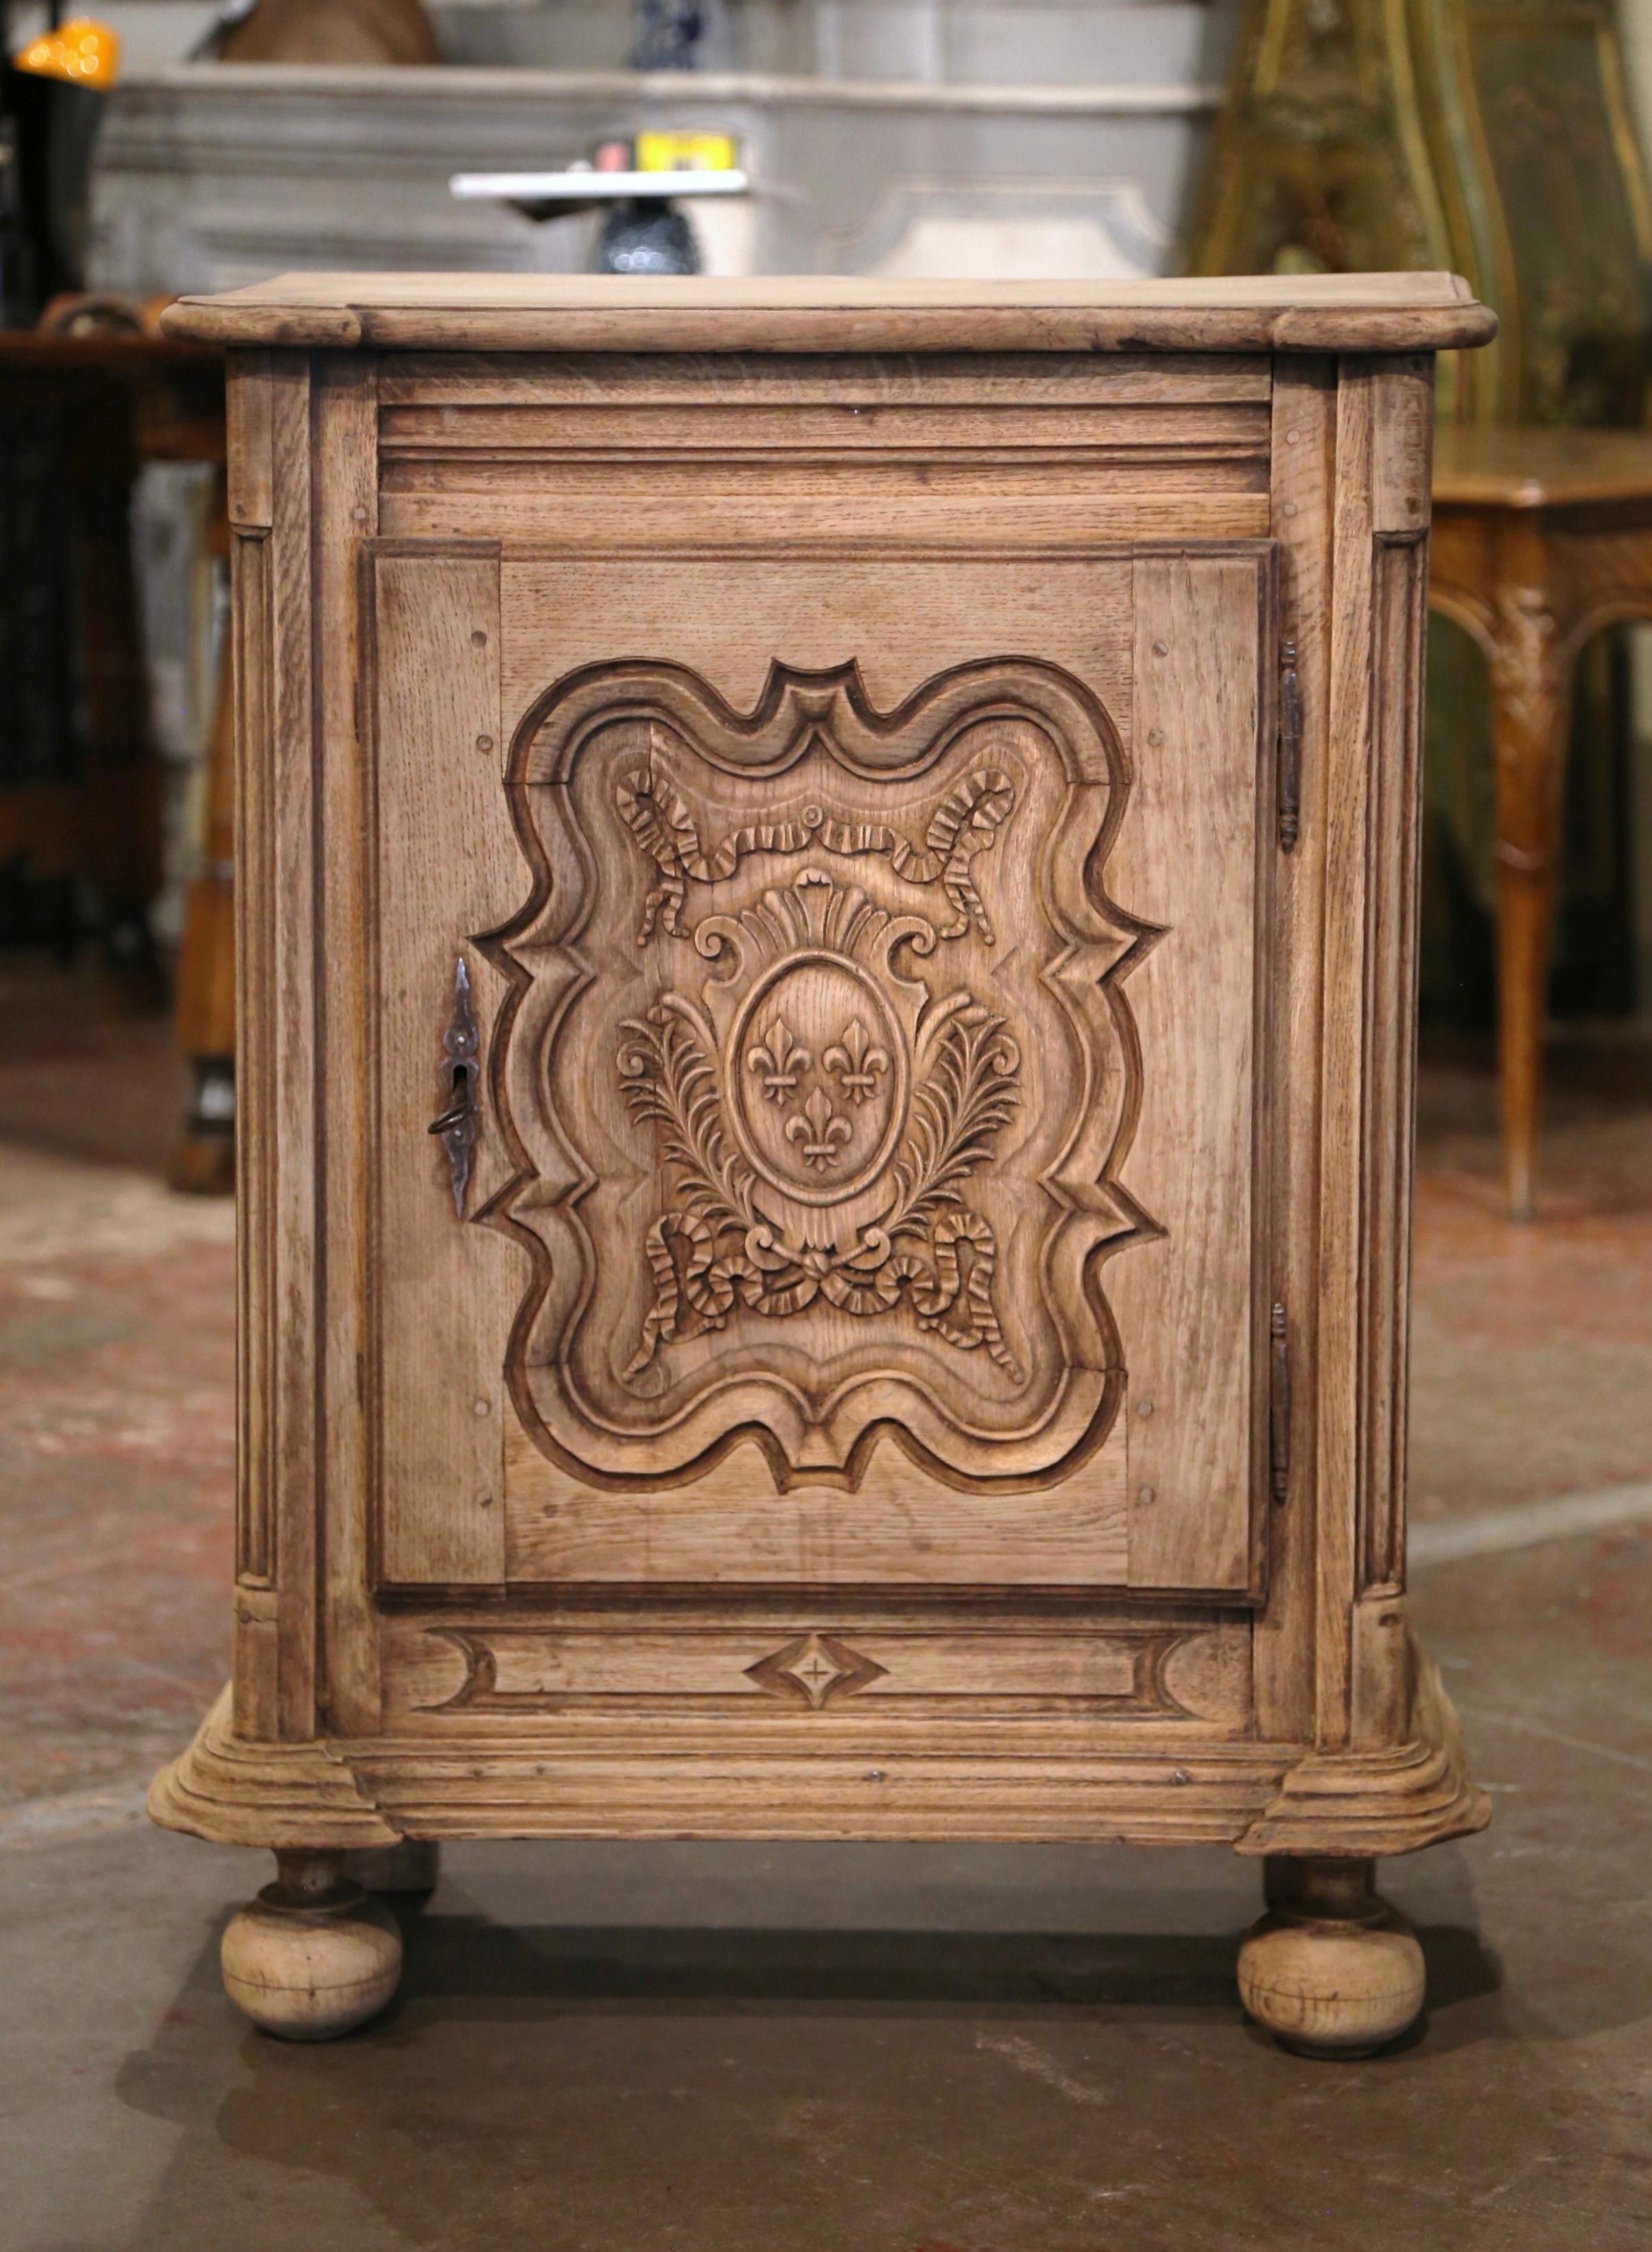 This elegant antique jelly cabinet was crafted in Normandy, circa 1870. Built in oak wood, the small buffet stands on bun feet over a molded plinth base decorated with geometric motif. The provincial confiturier is fitted with a center raised panel